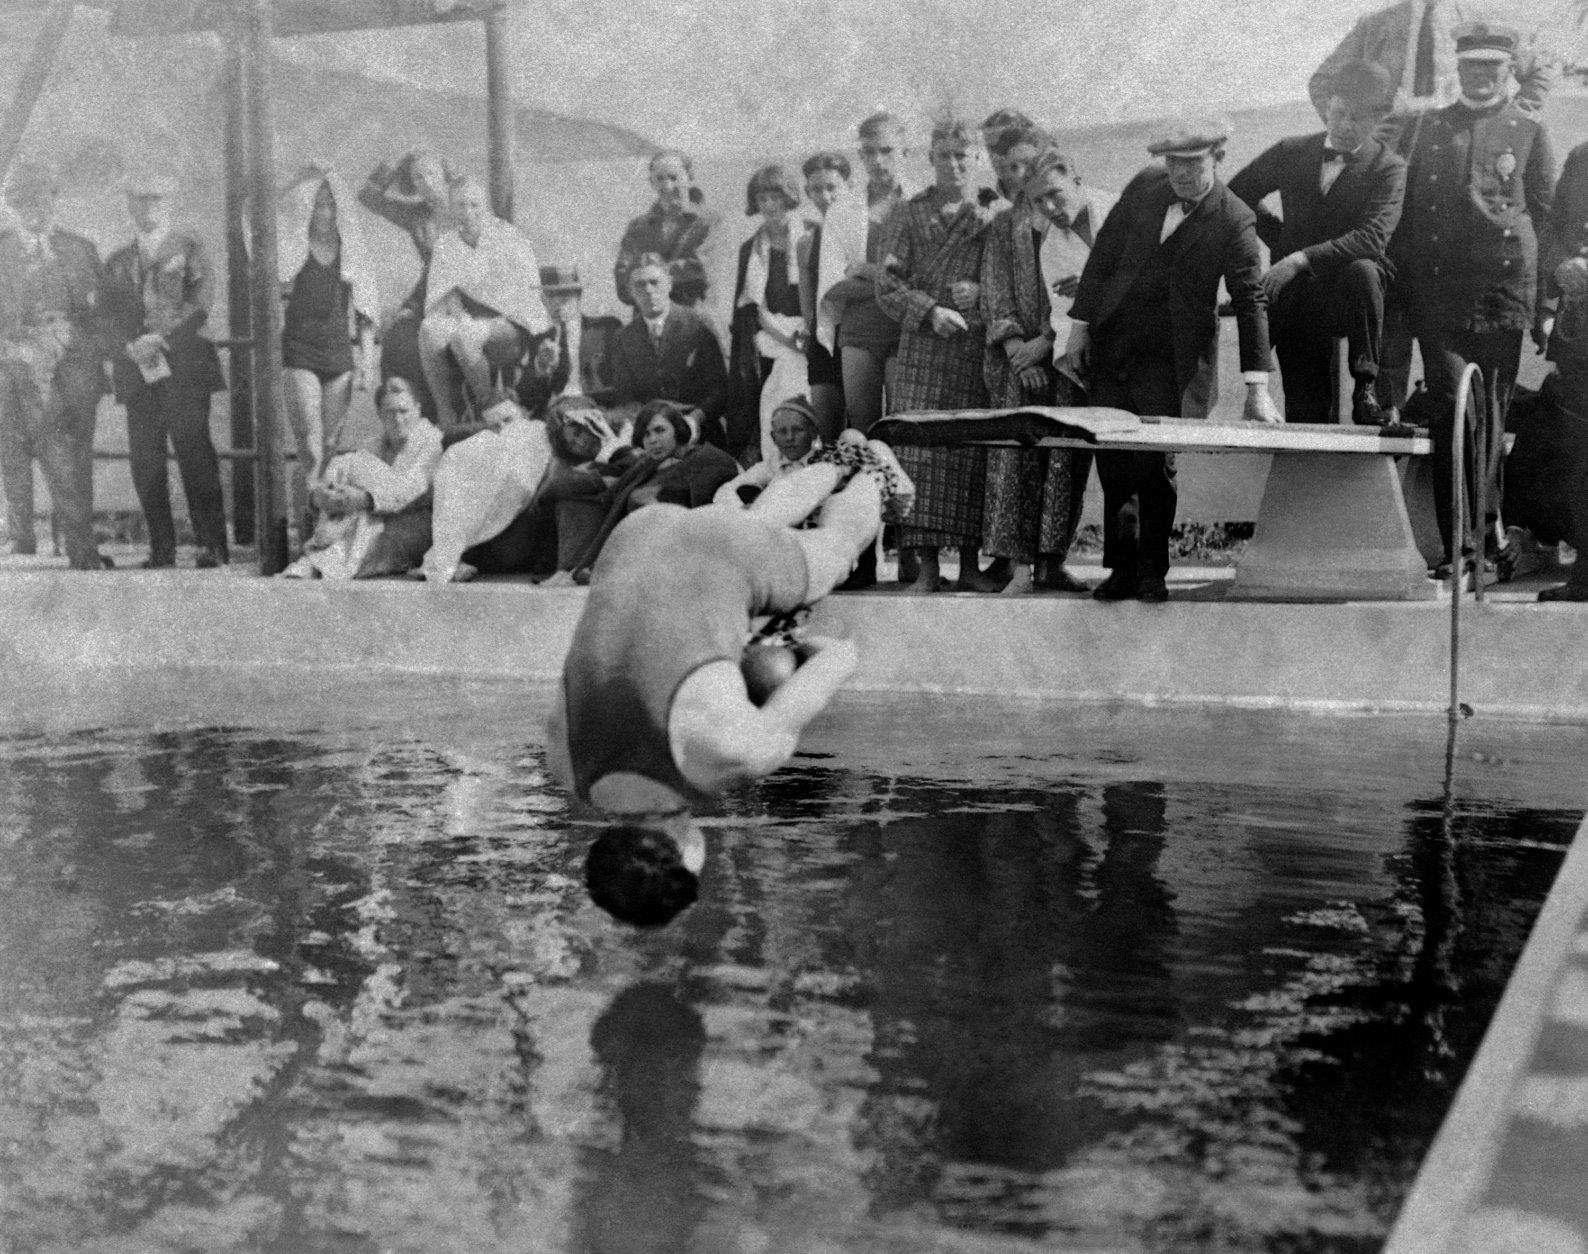 Harry Houdini, handcuffed, and with his feet bound in chains, dives into pool at Los Angeles, May 7, 1923. (AP Photo)